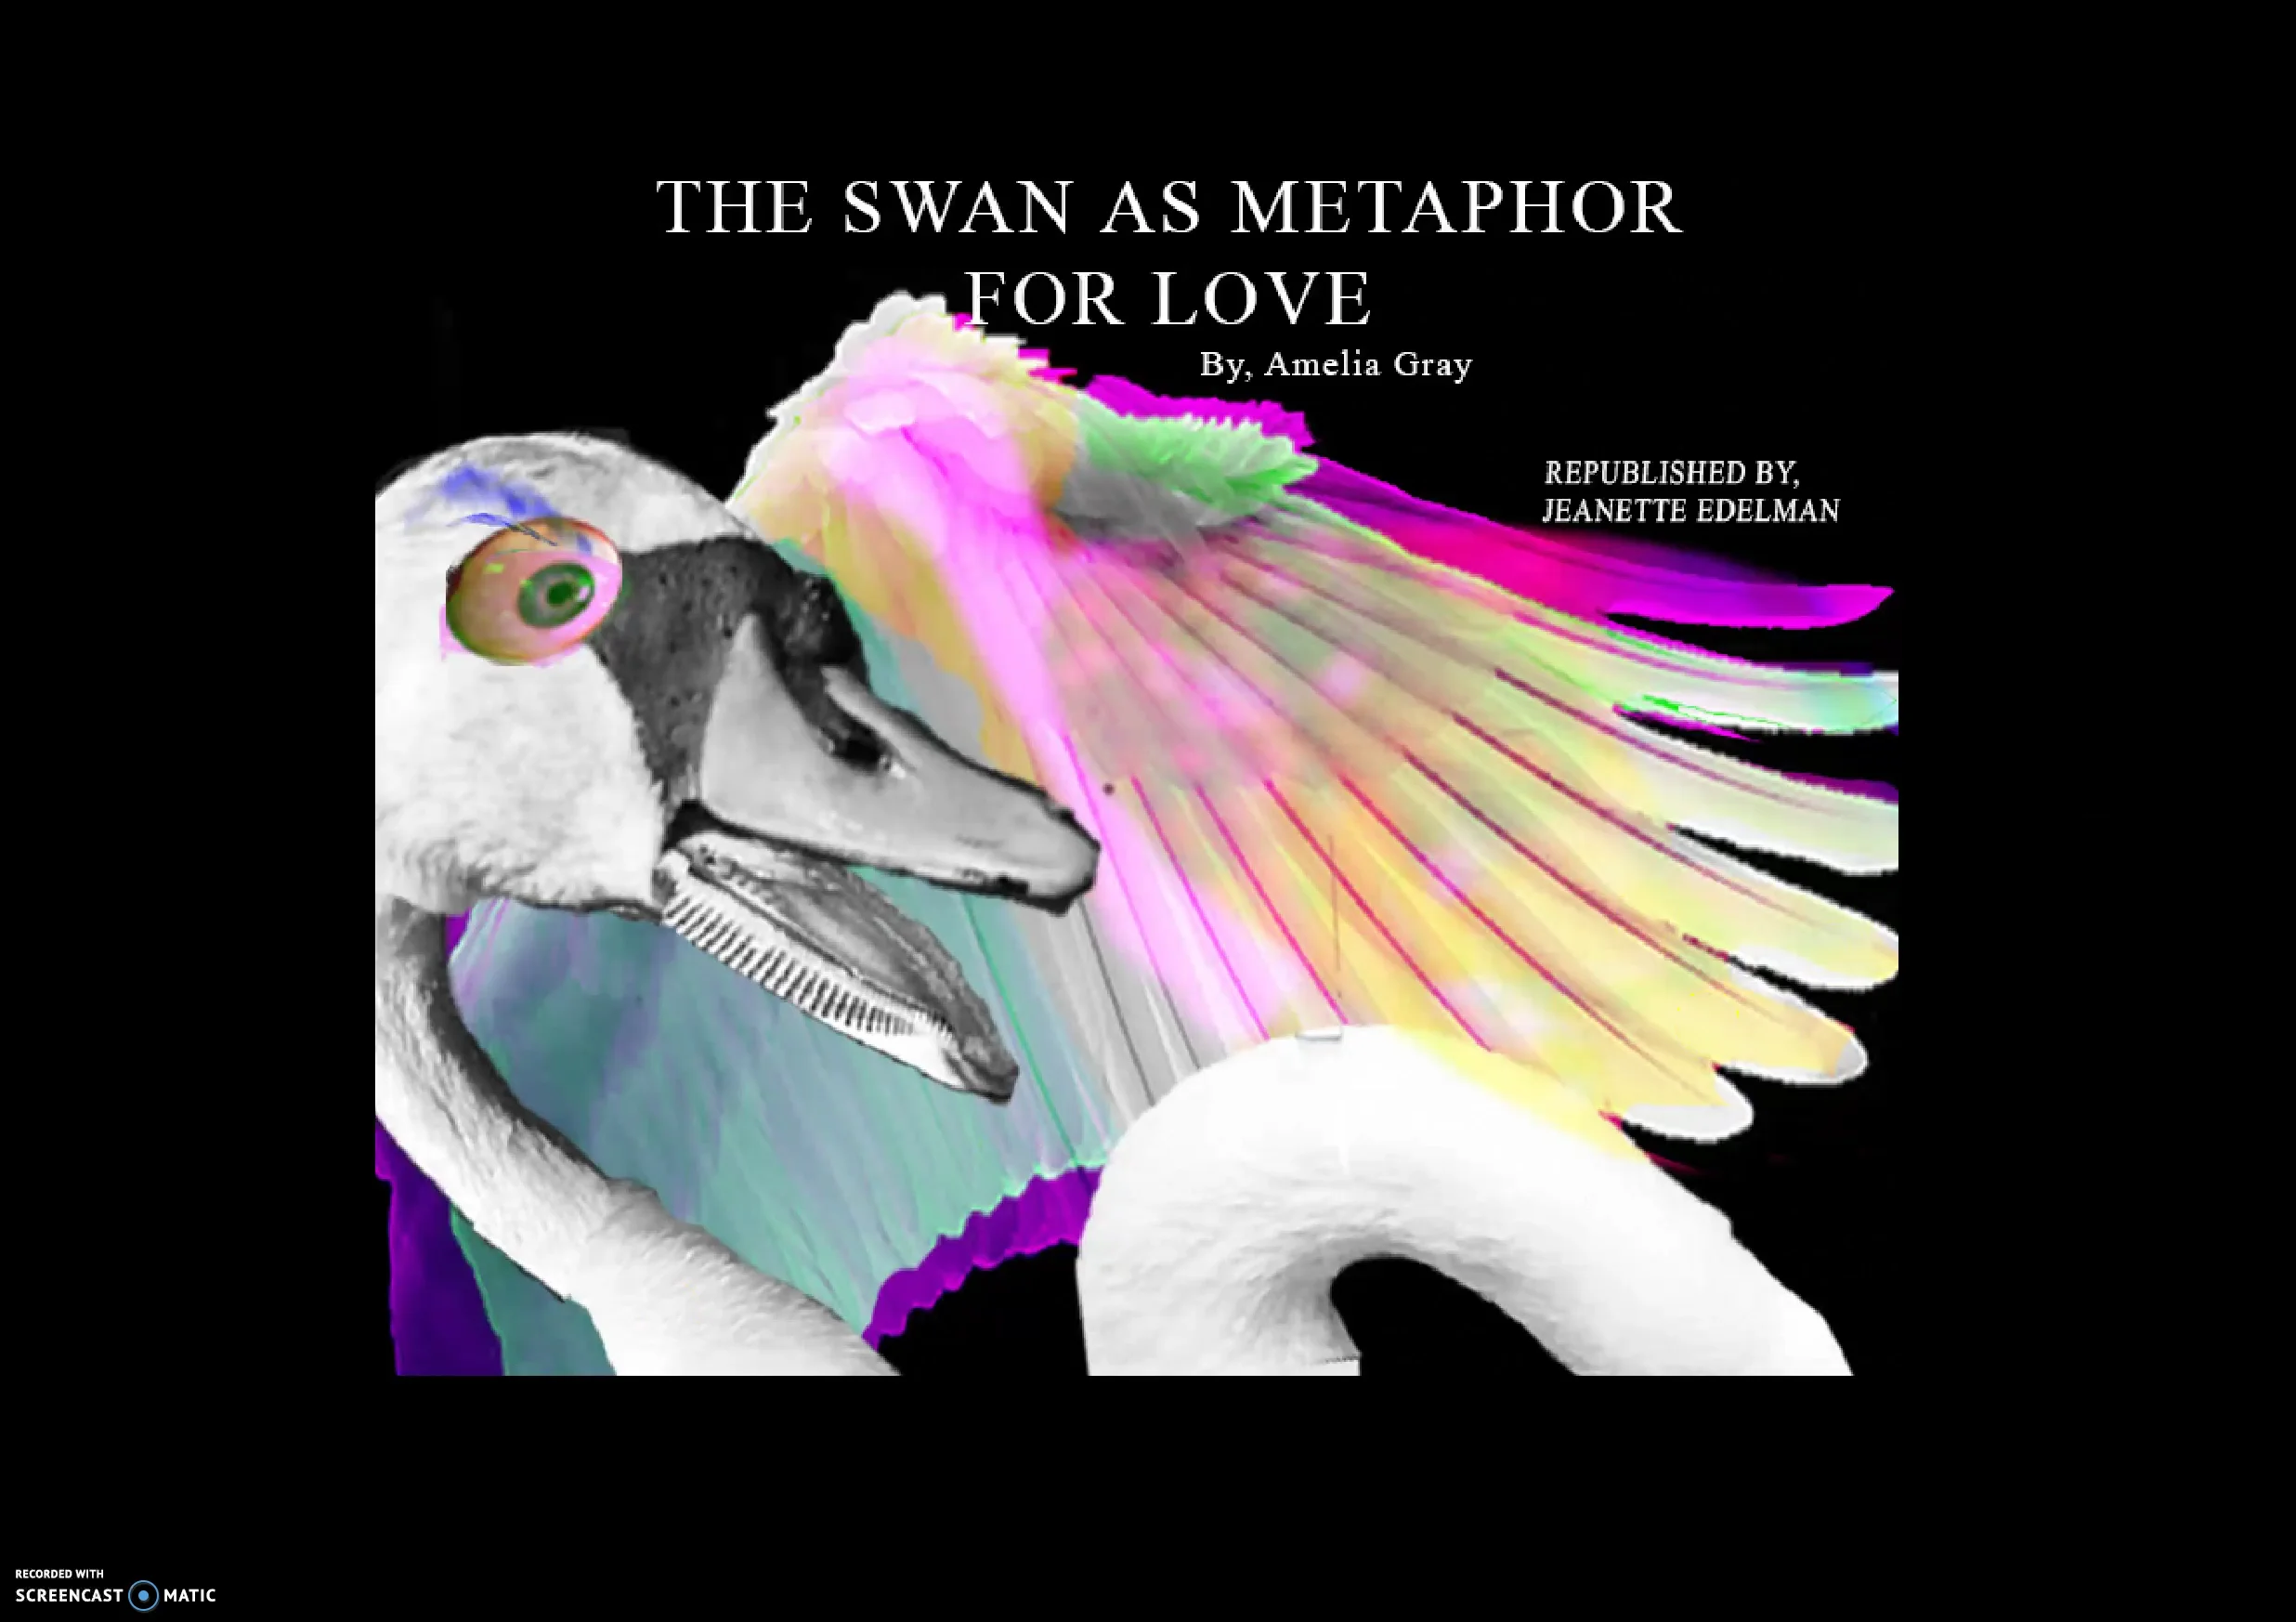 The Swan as Metaphor for Love